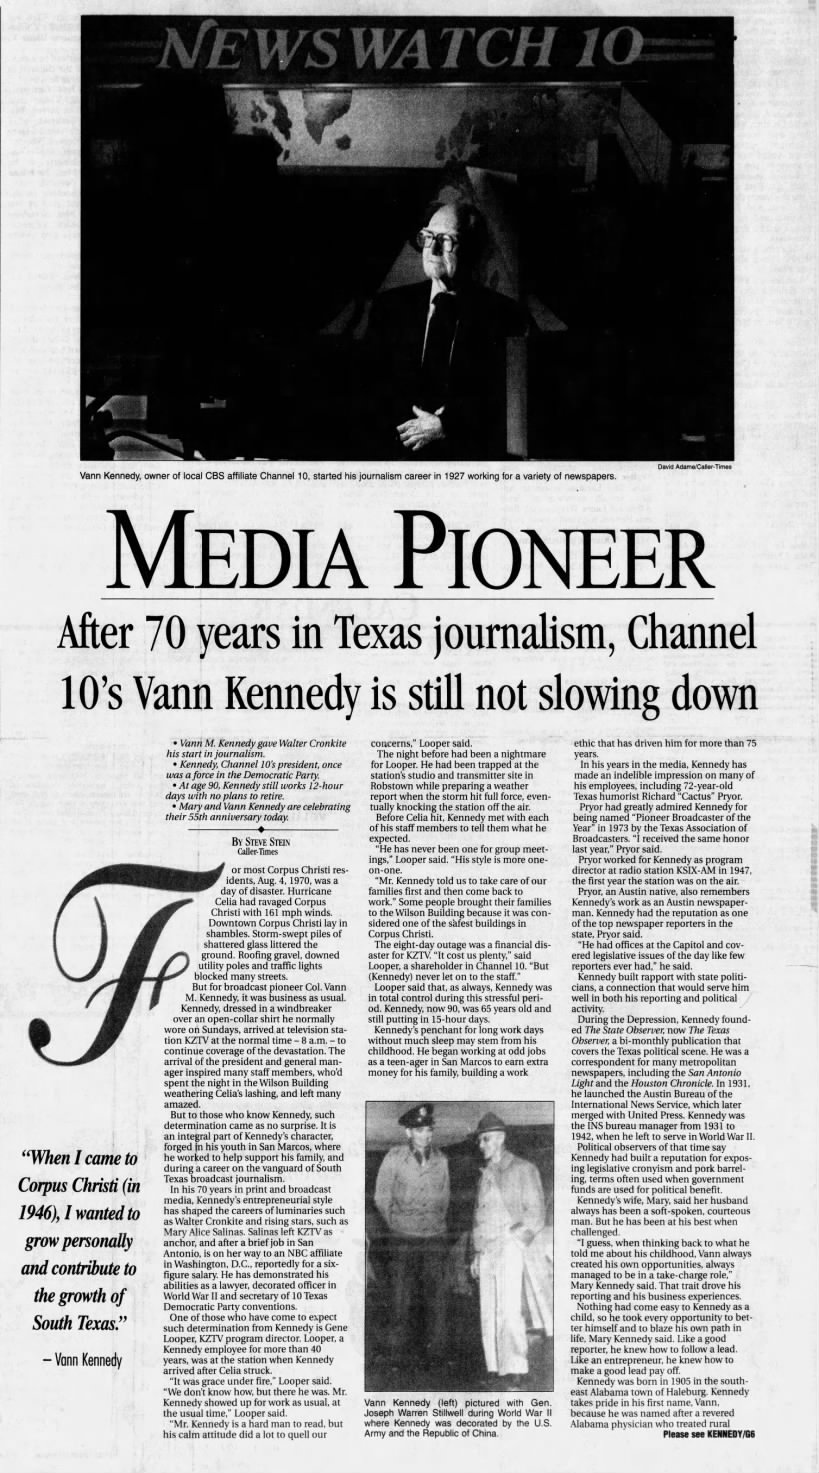 Media Pioneer: After 70 years in Texas journalism, Channel 10's Vann Kennedy is still not slowing